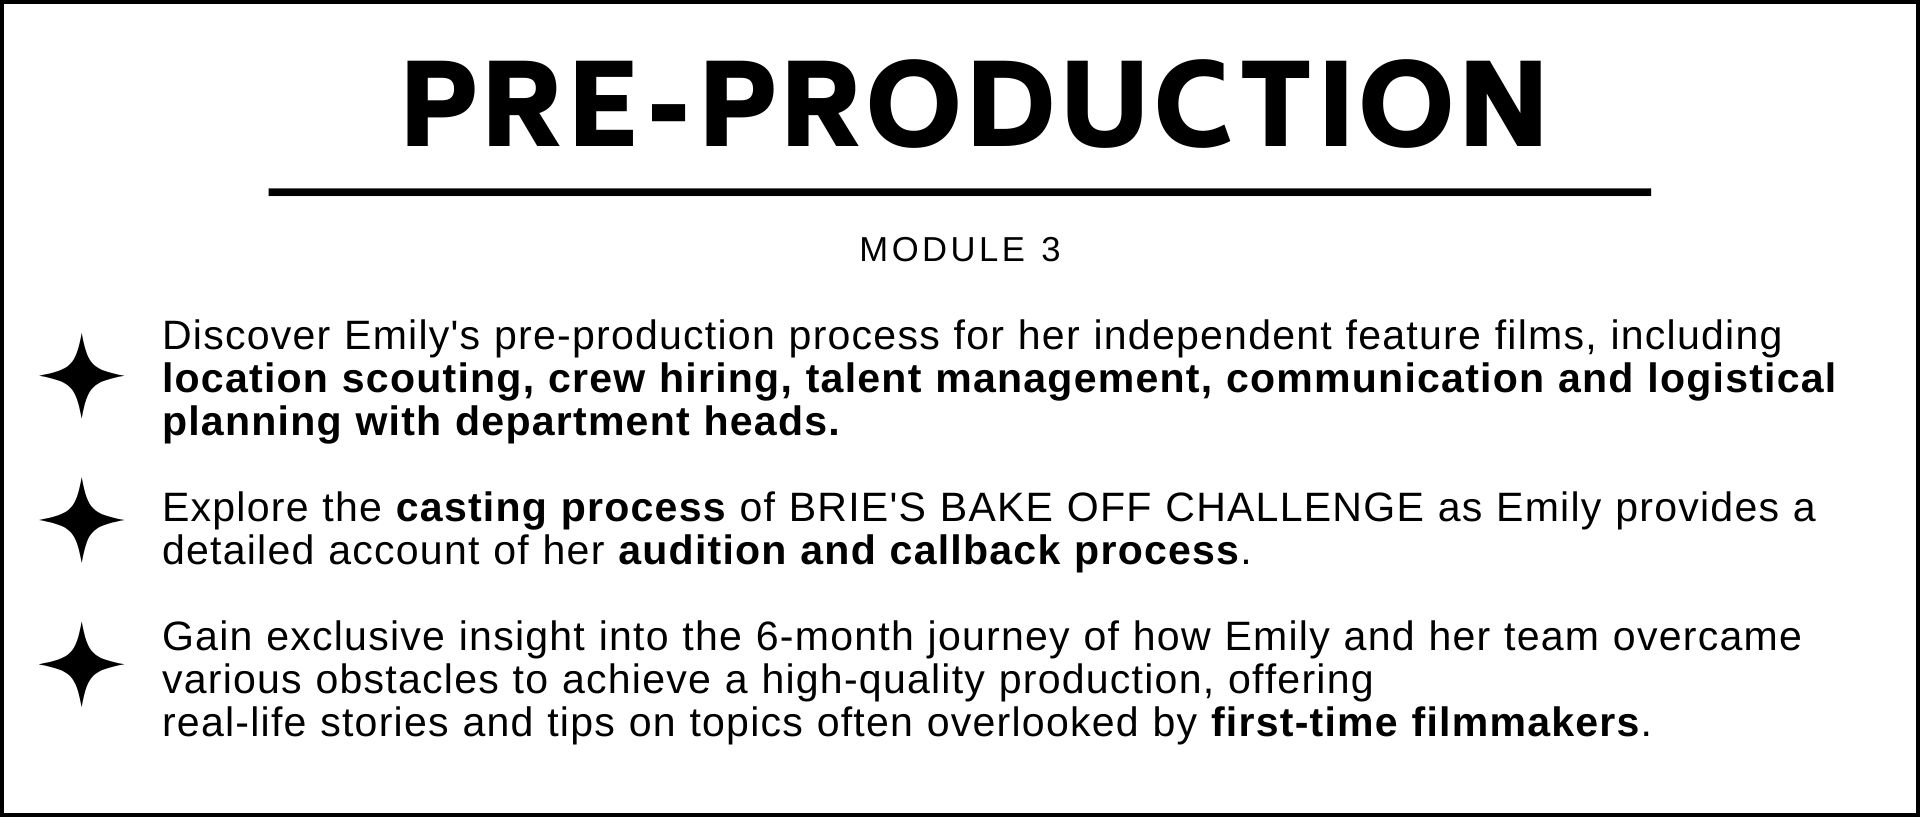 Discover Emilys pre-production process for her independent feature films, including location scouting, crew hiring, talent management, and communication and logistical planning with department heads.  Explore the casting process of BRIES BAKE OFF CHALLENGE as Emily provides a detailed account of her audition and callback process.  Gain exclusive insight into the 6-month journey of how Emily and her team overcame various obstacles to achieve a high-quality production, offering  real-life stories and tips on topics often overlooked by first-time filmmakers.